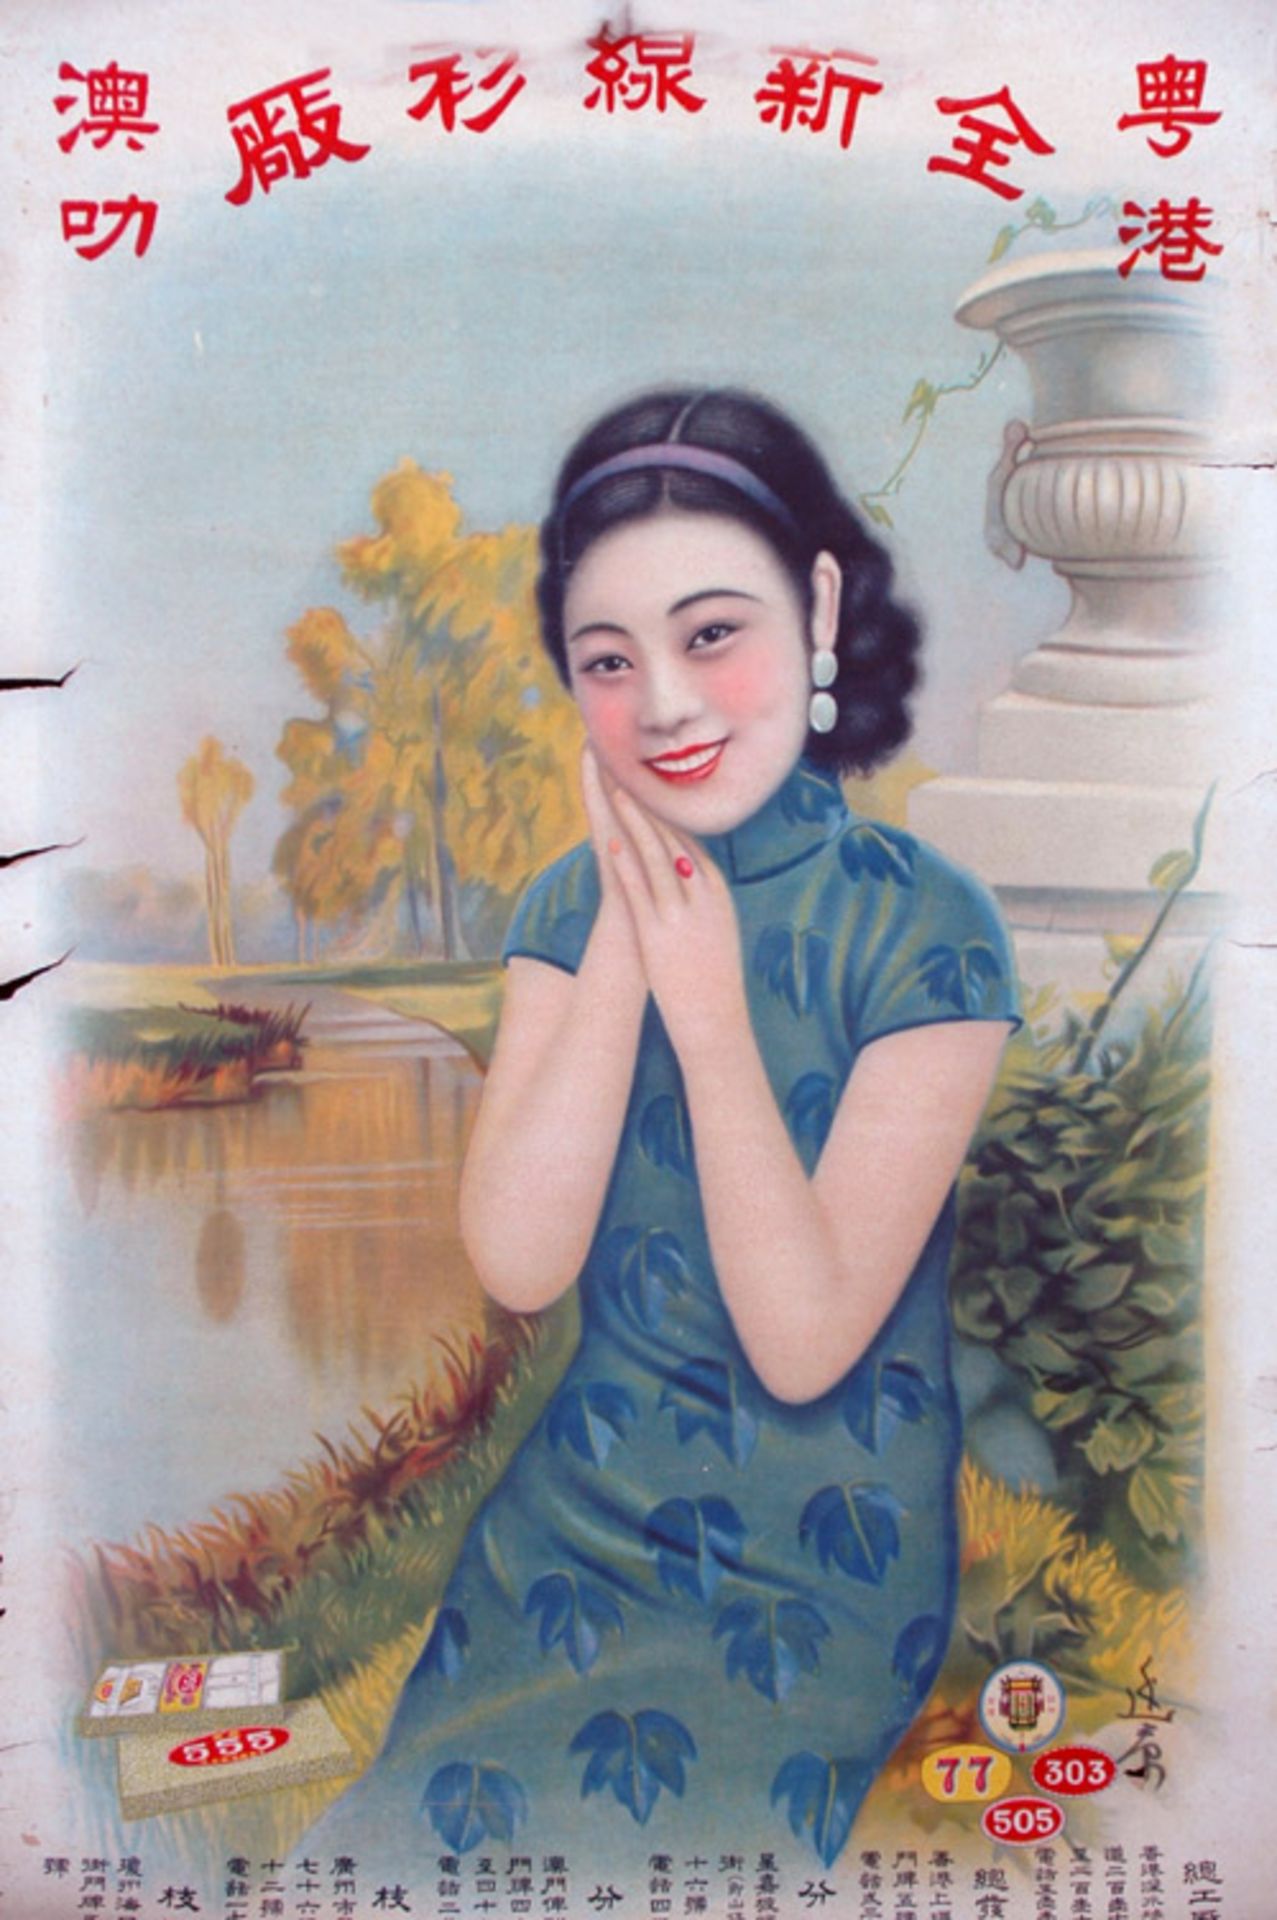 Original Advertising poster for the Chinese market. Condition Fair